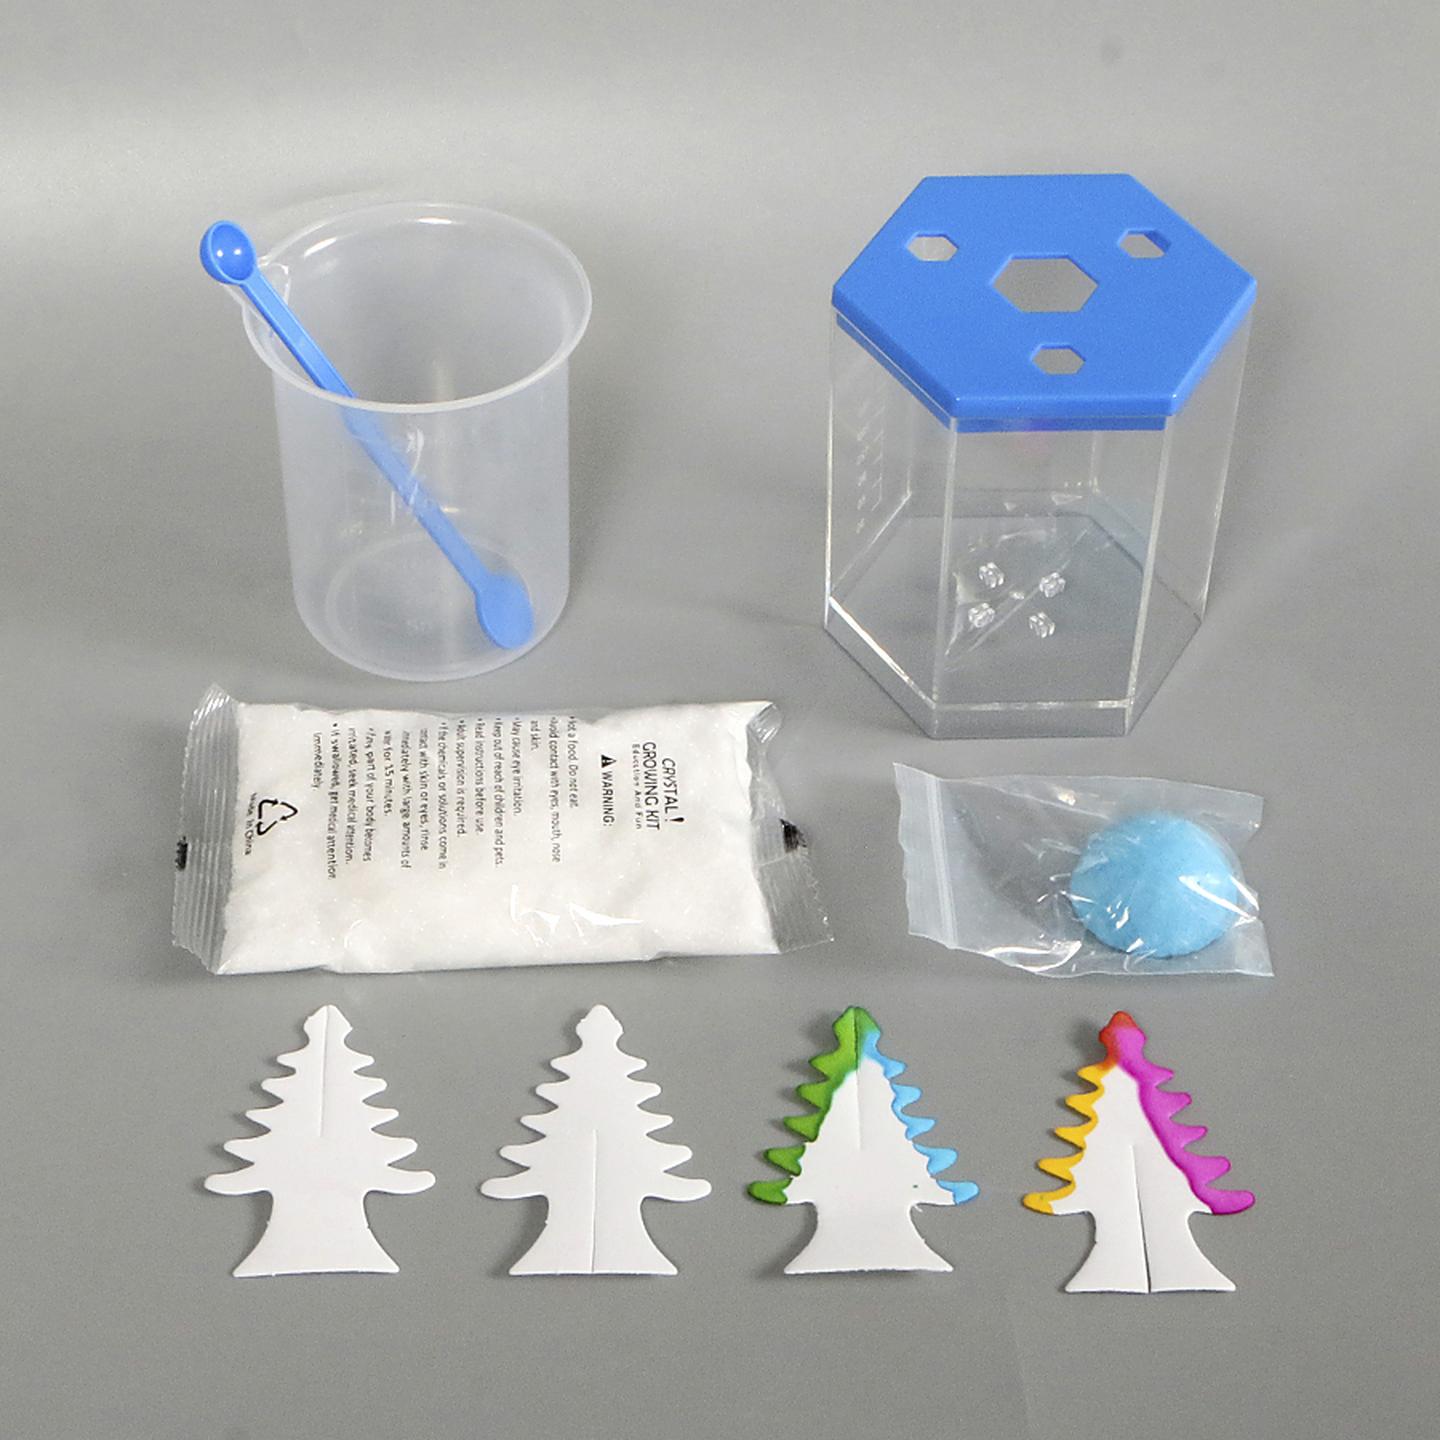 Grow Your Own Crystals Experiment STEM Kit